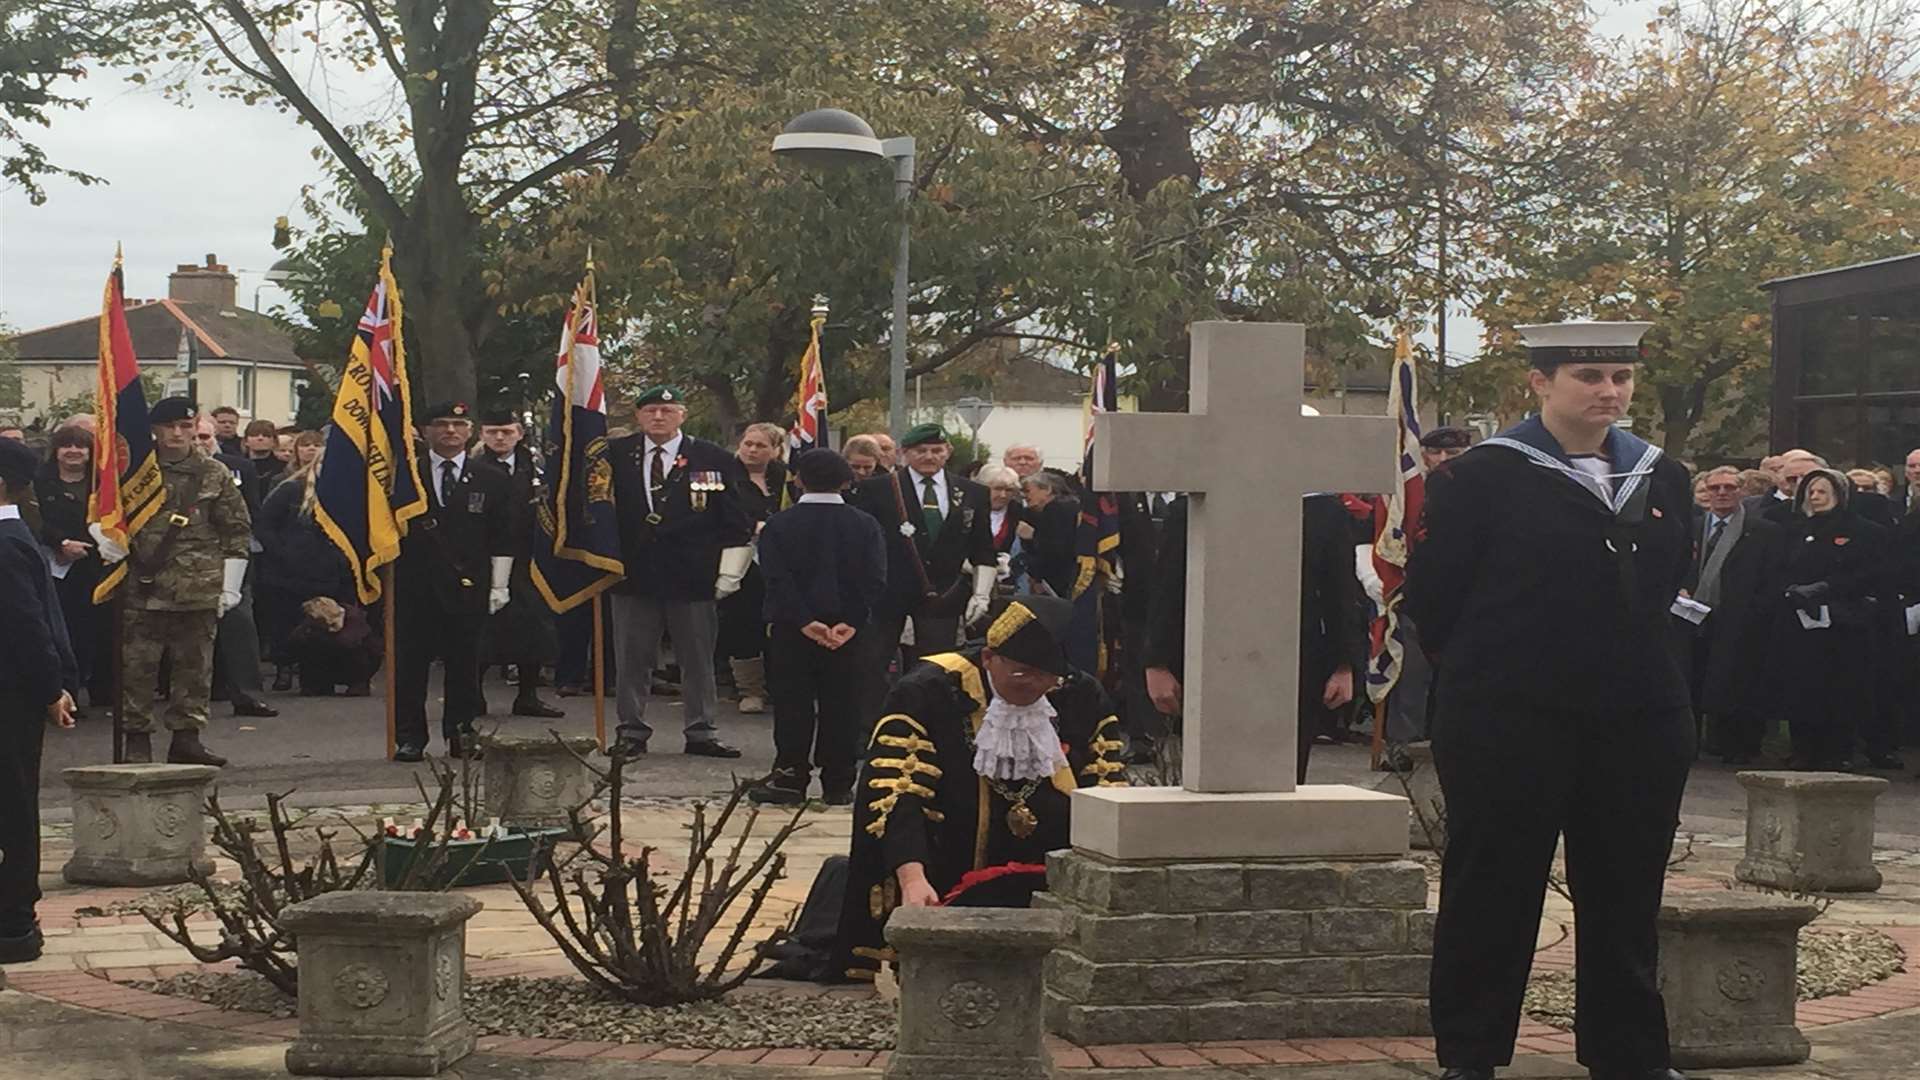 Mayor of Deal Adrian Friend places a wreath down